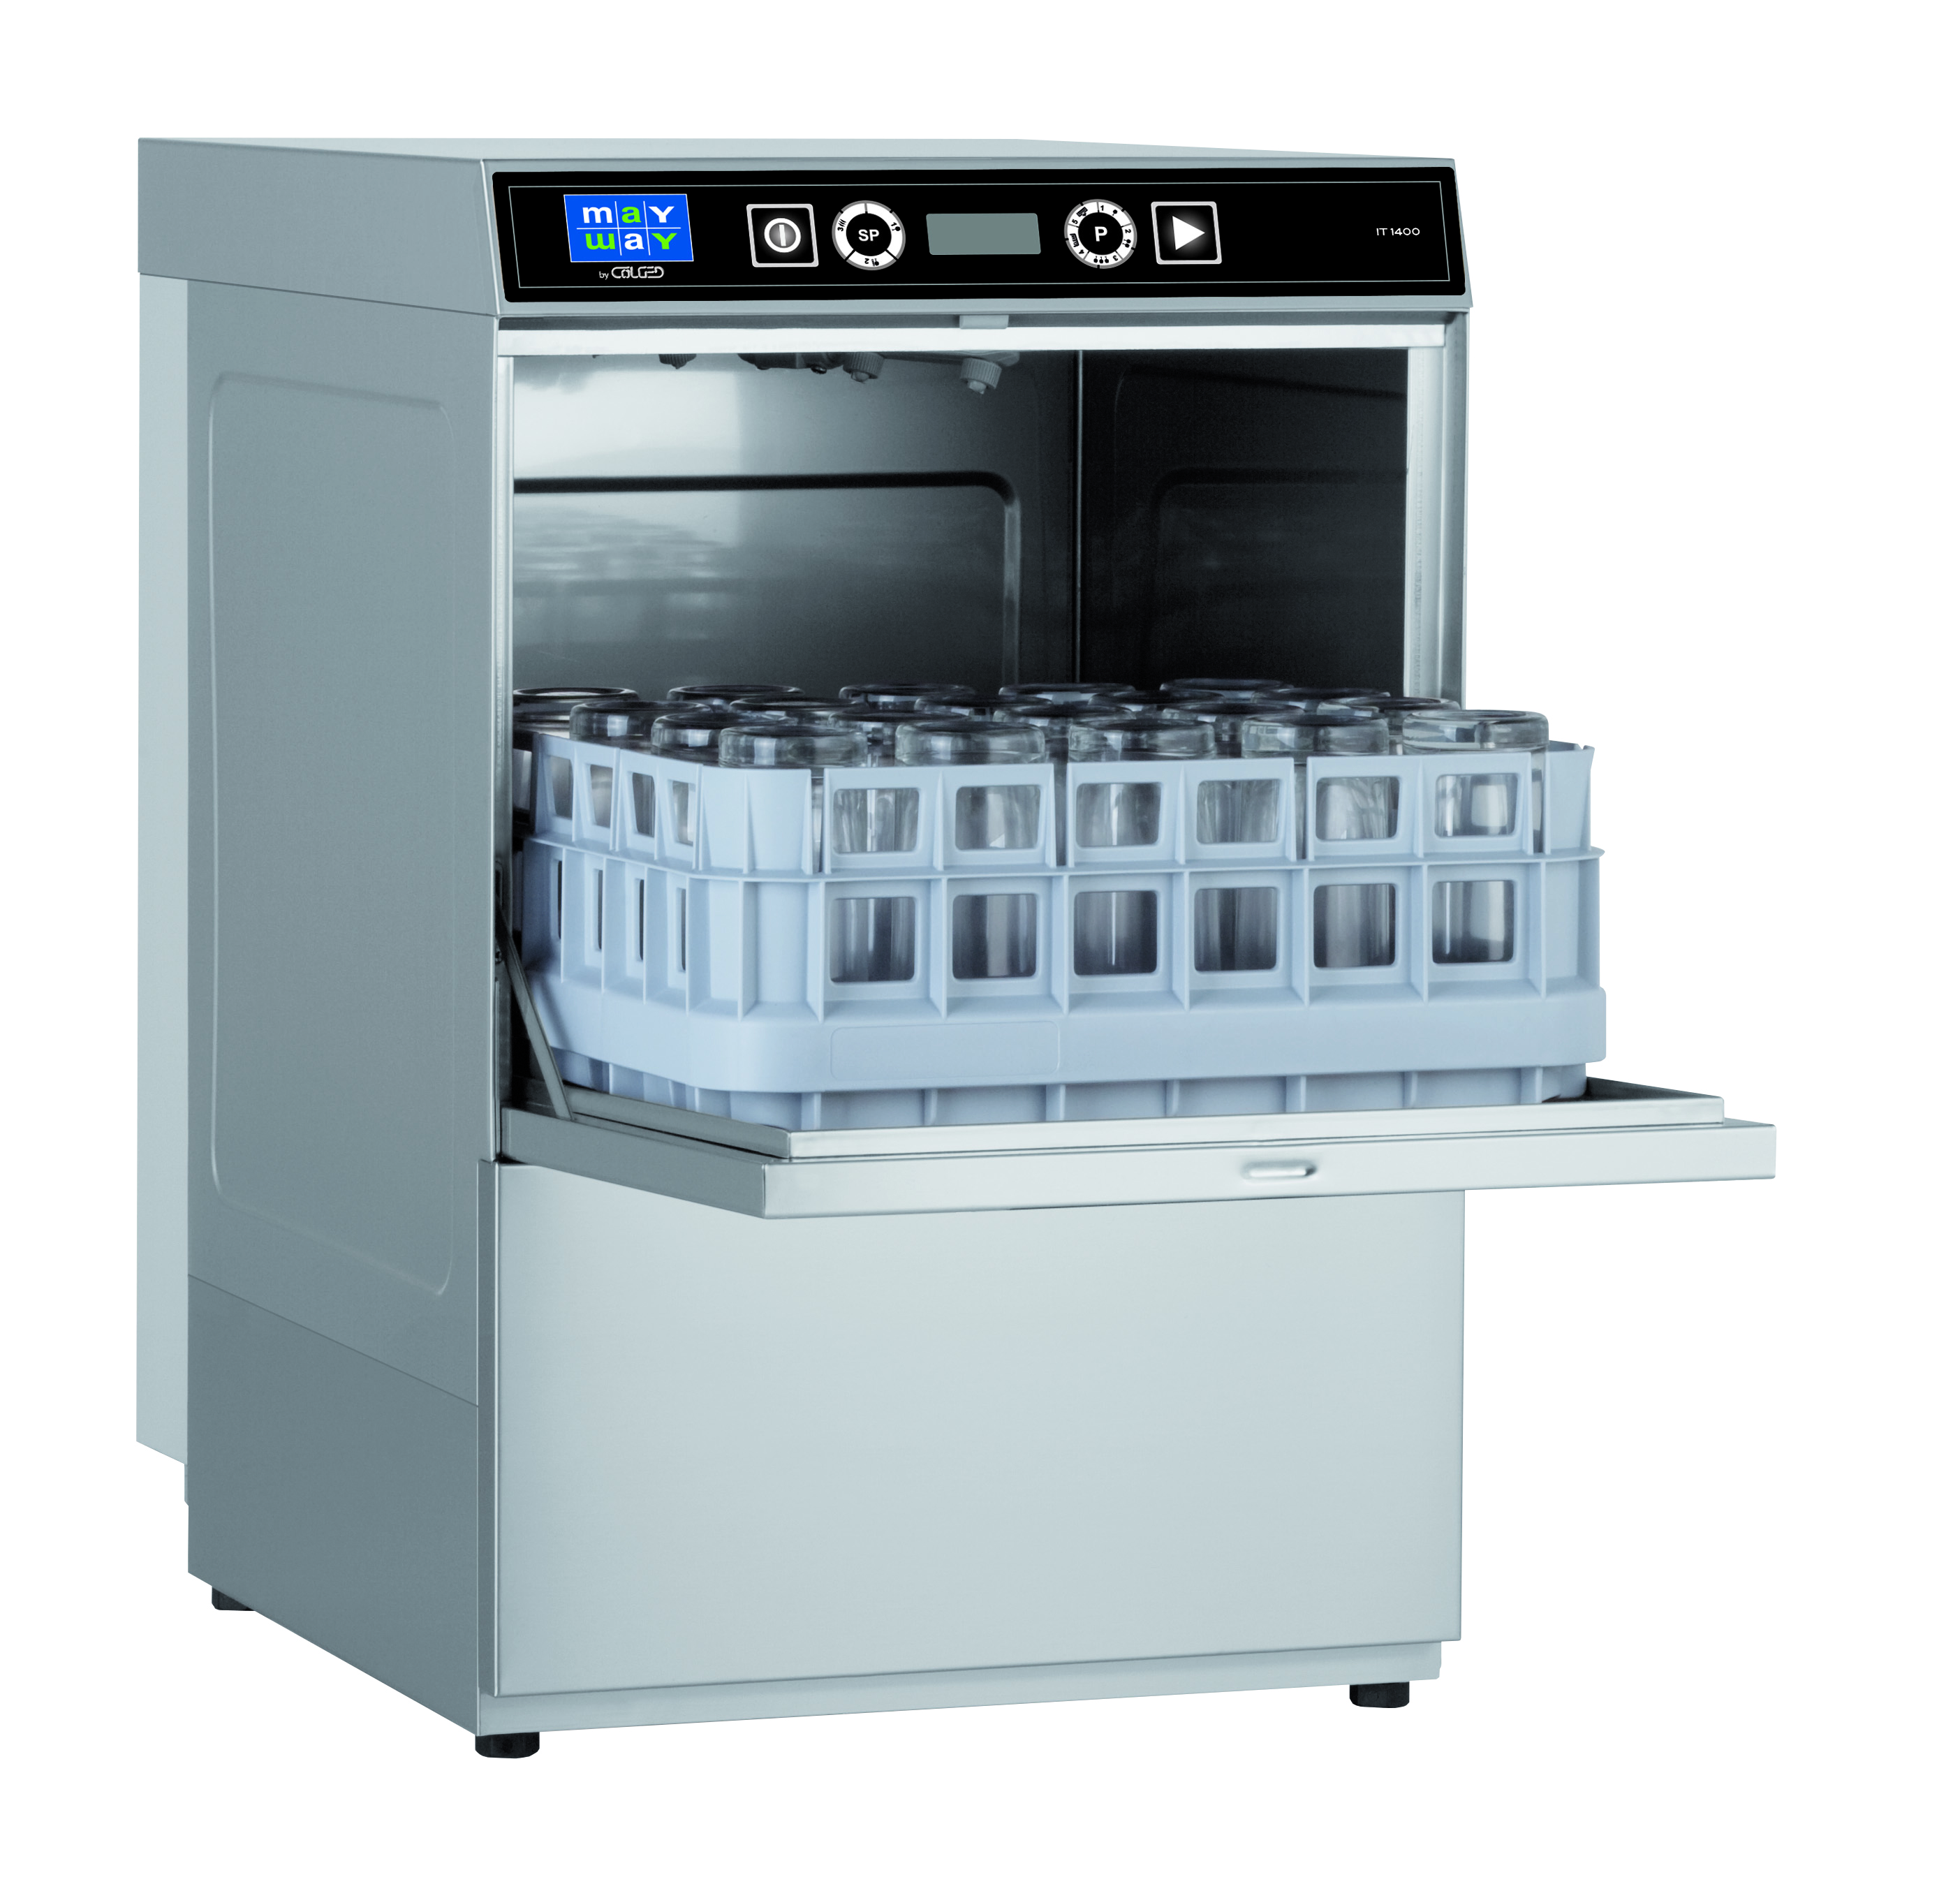 Commercial glass washer - ISYTECH 33 - COLGED